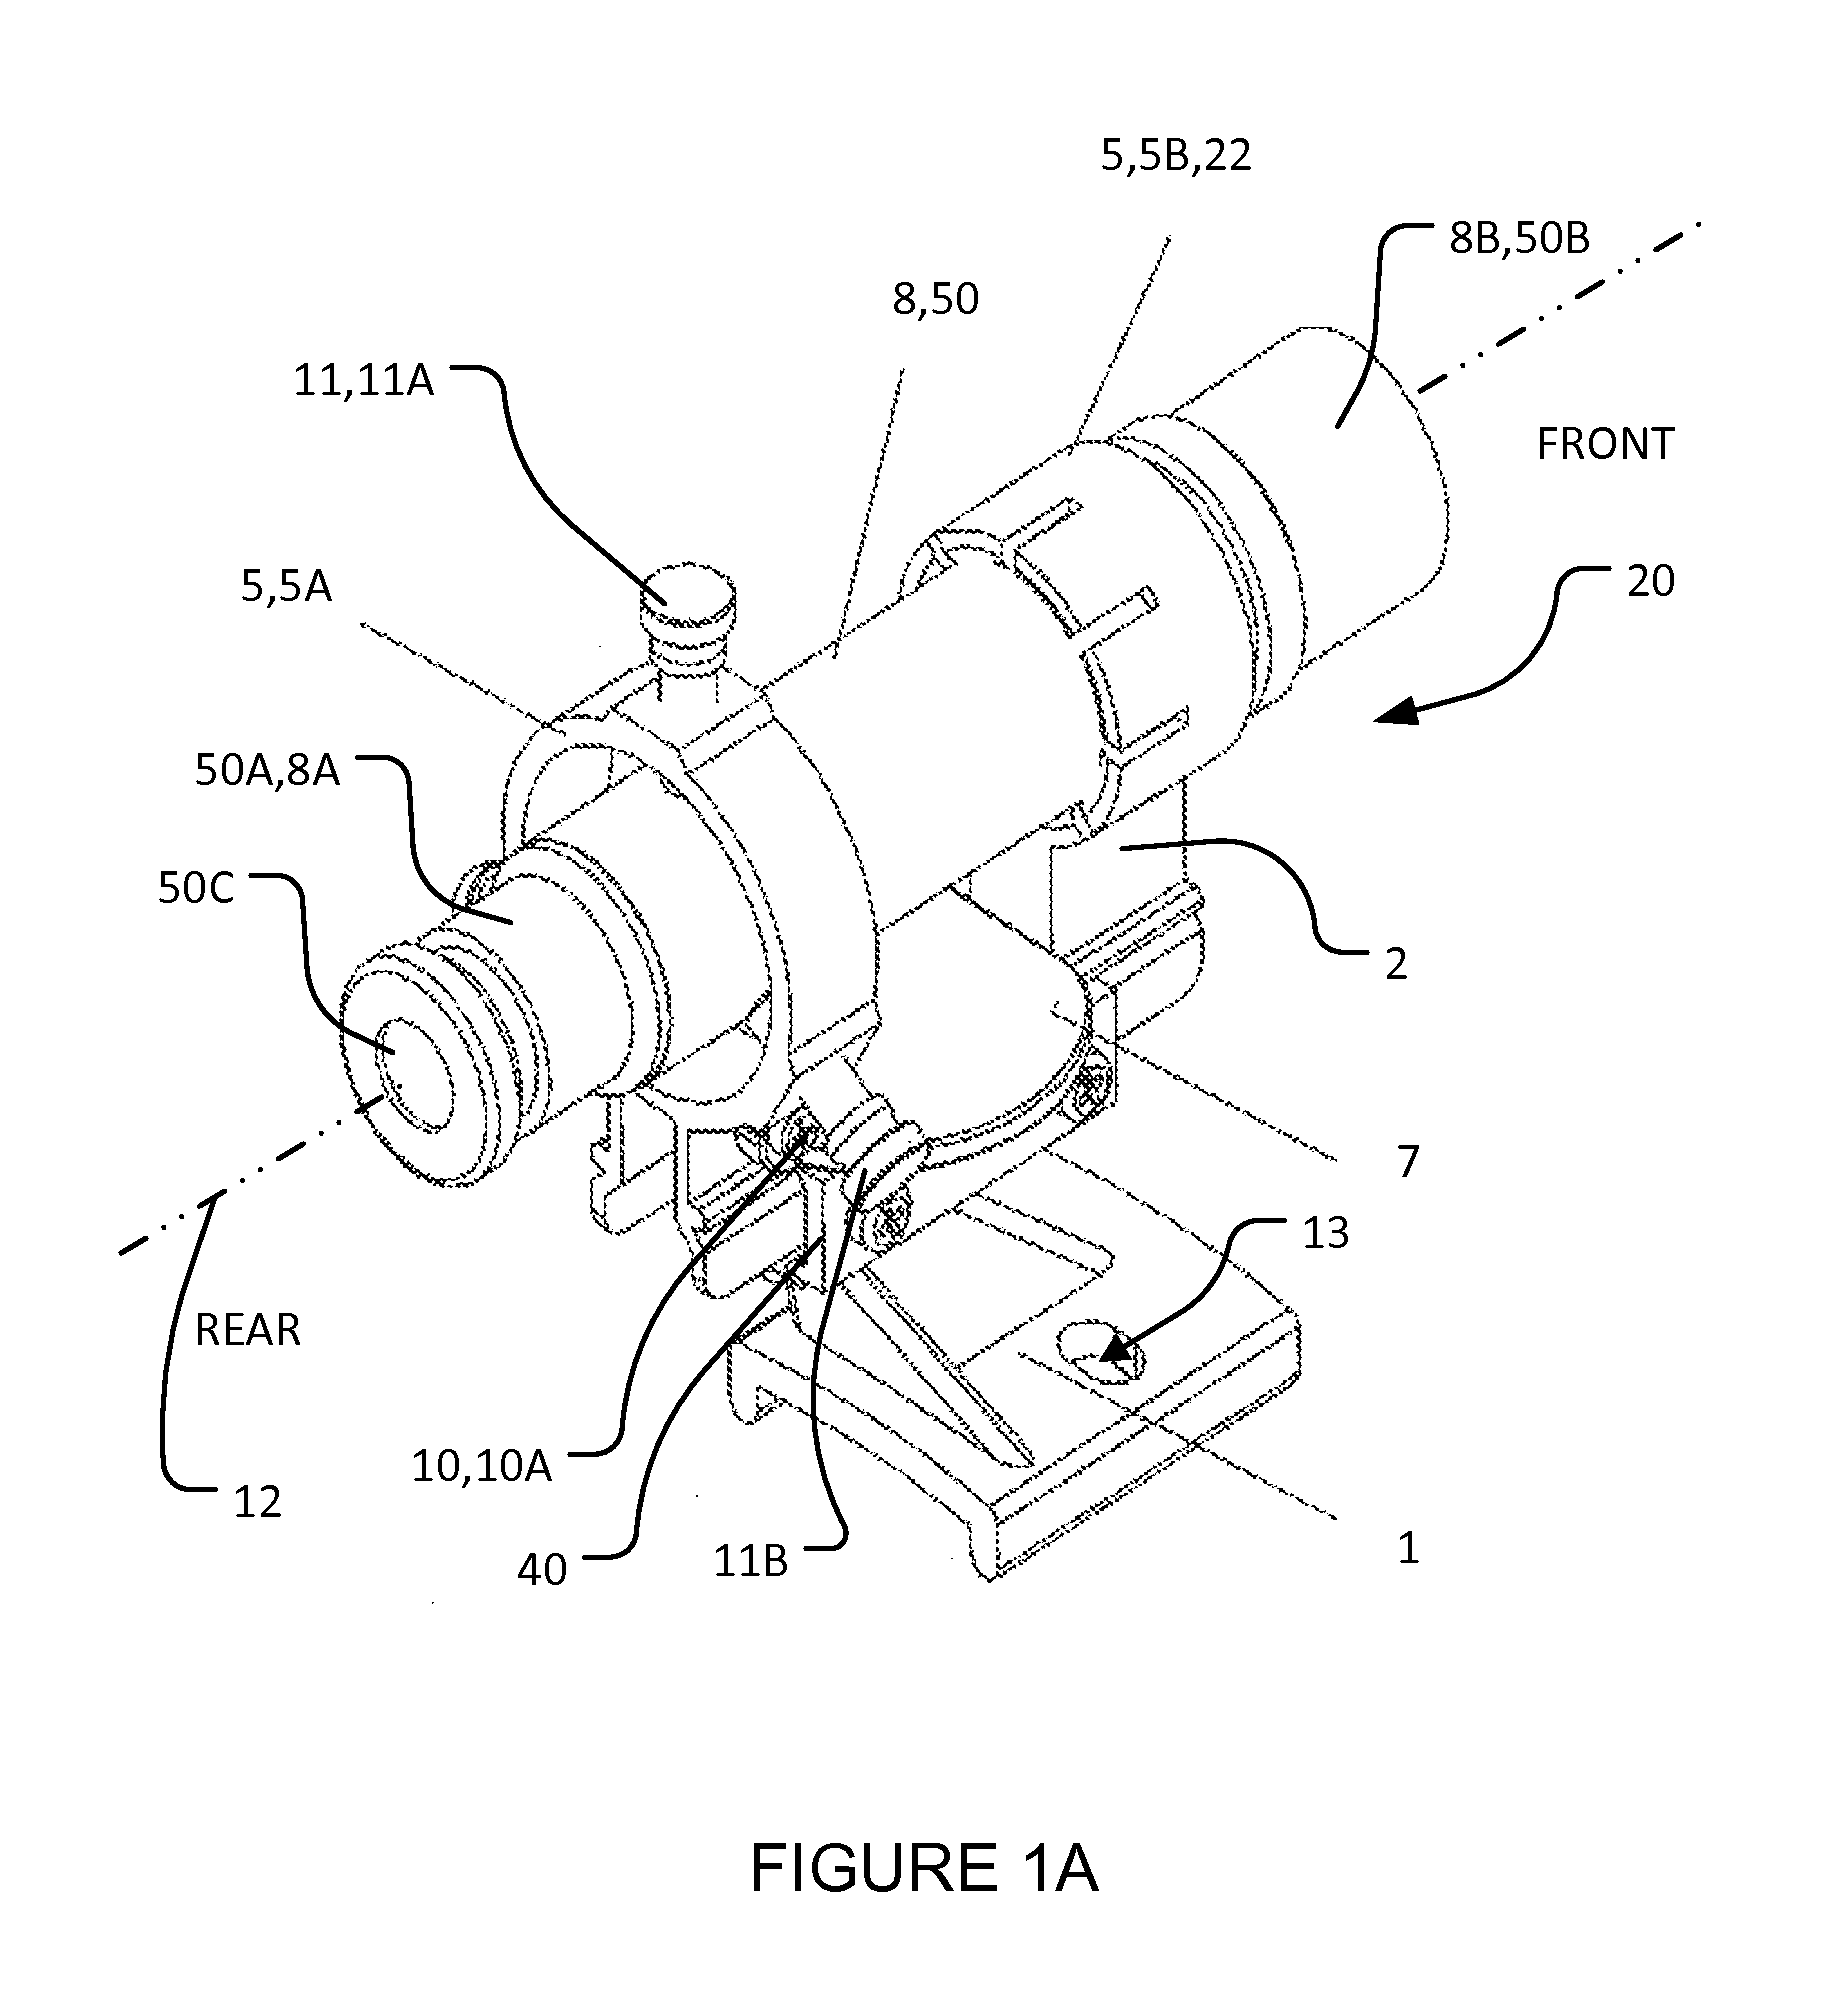 Object finder mounting apparatus, systems for viewing objects and methods for using same